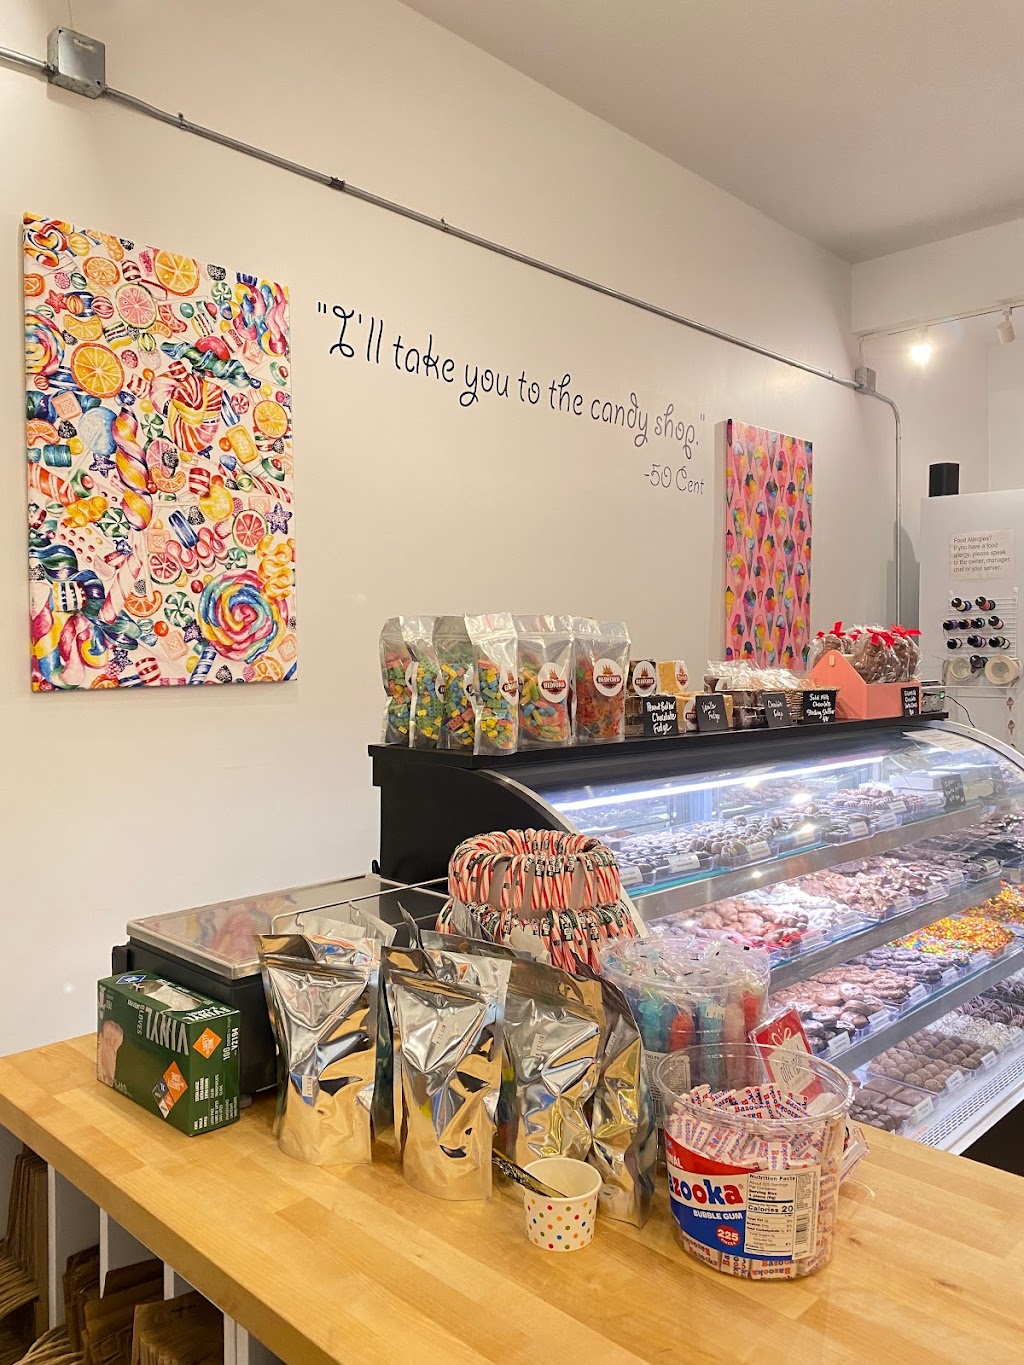 Bedford Candy Bar | 627 Old Post Rd, Bedford, NY 10506 | Phone: (914) 234-8645